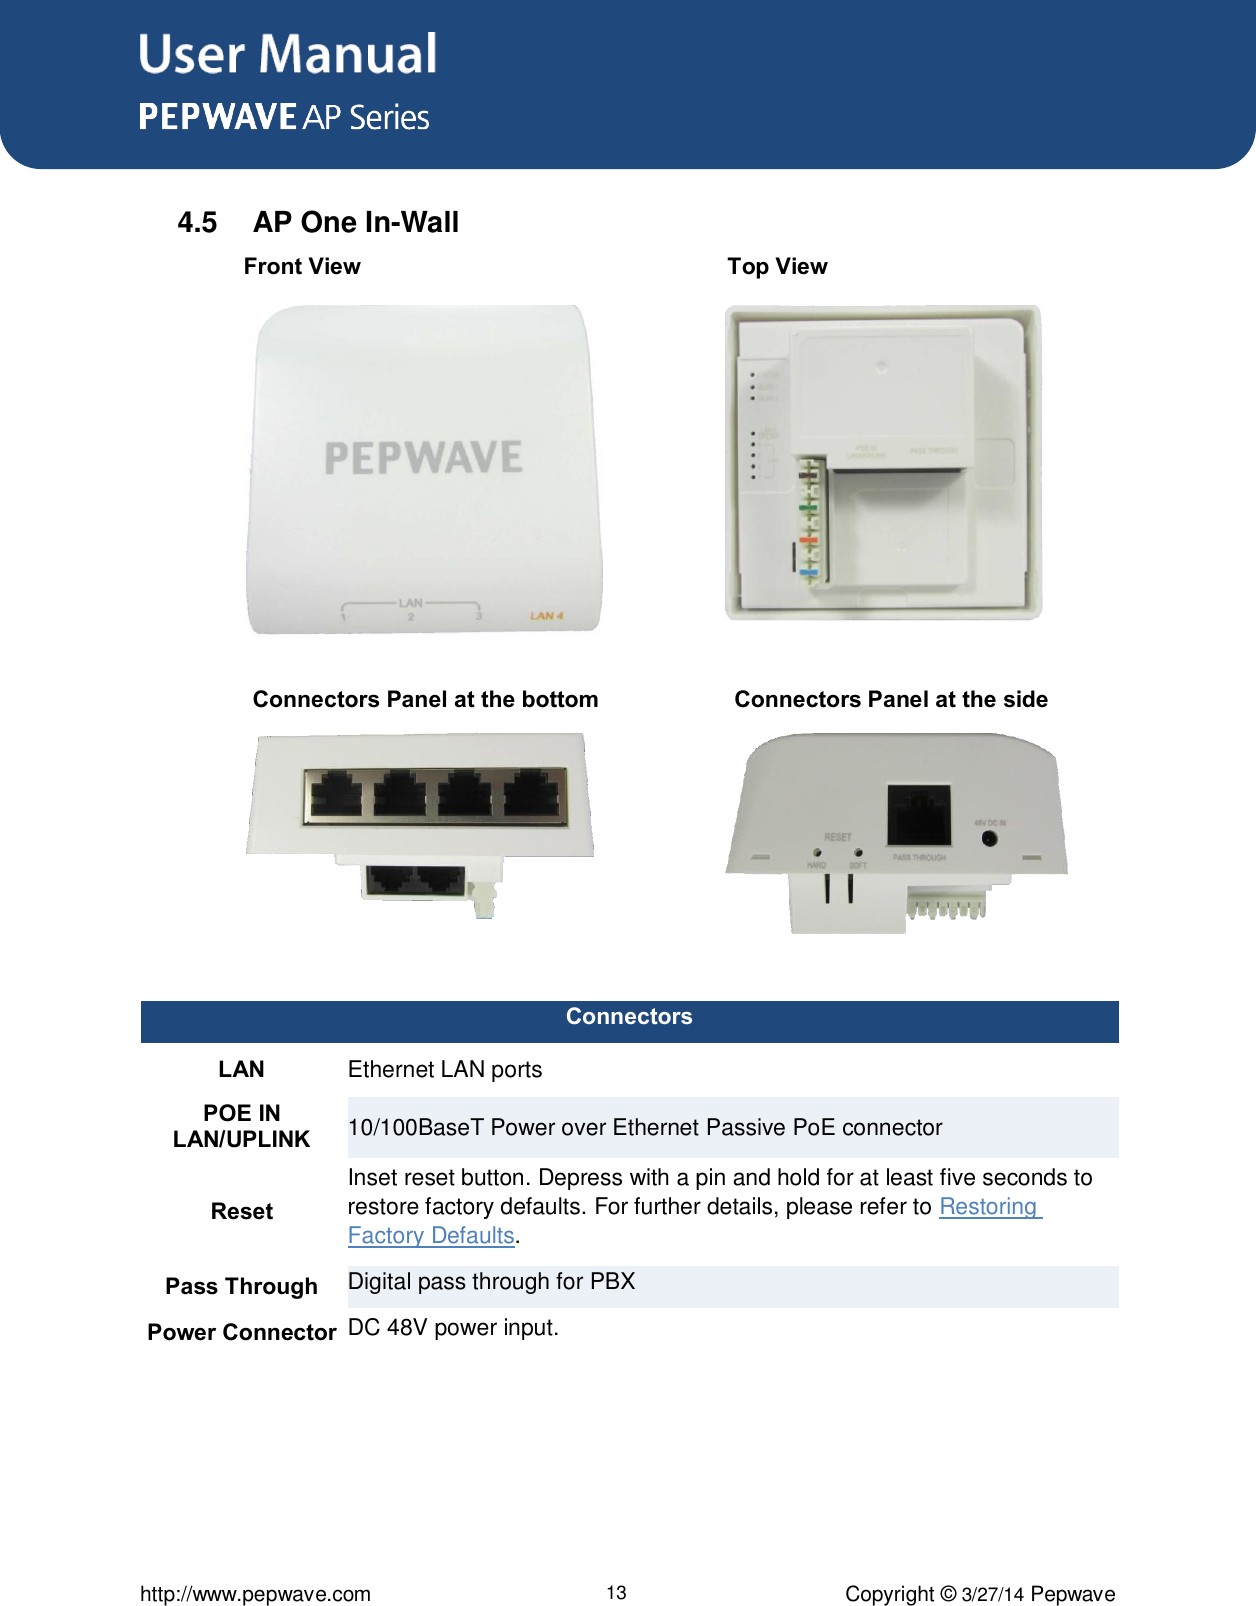 User Manual      http://www.pepwave.com 13 Copyright ©  3/27/14 Pepwave  4.5  AP One In-Wall   Front View                                Top View        Connectors Panel at the bottom        Connectors Panel at the side      Connectors LAN Ethernet LAN ports POE IN LAN/UPLINK 10/100BaseT Power over Ethernet Passive PoE connector Reset Inset reset button. Depress with a pin and hold for at least five seconds to restore factory defaults. For further details, please refer to Restoring Factory Defaults. Pass Through Digital pass through for PBX Power Connector DC 48V power input.     